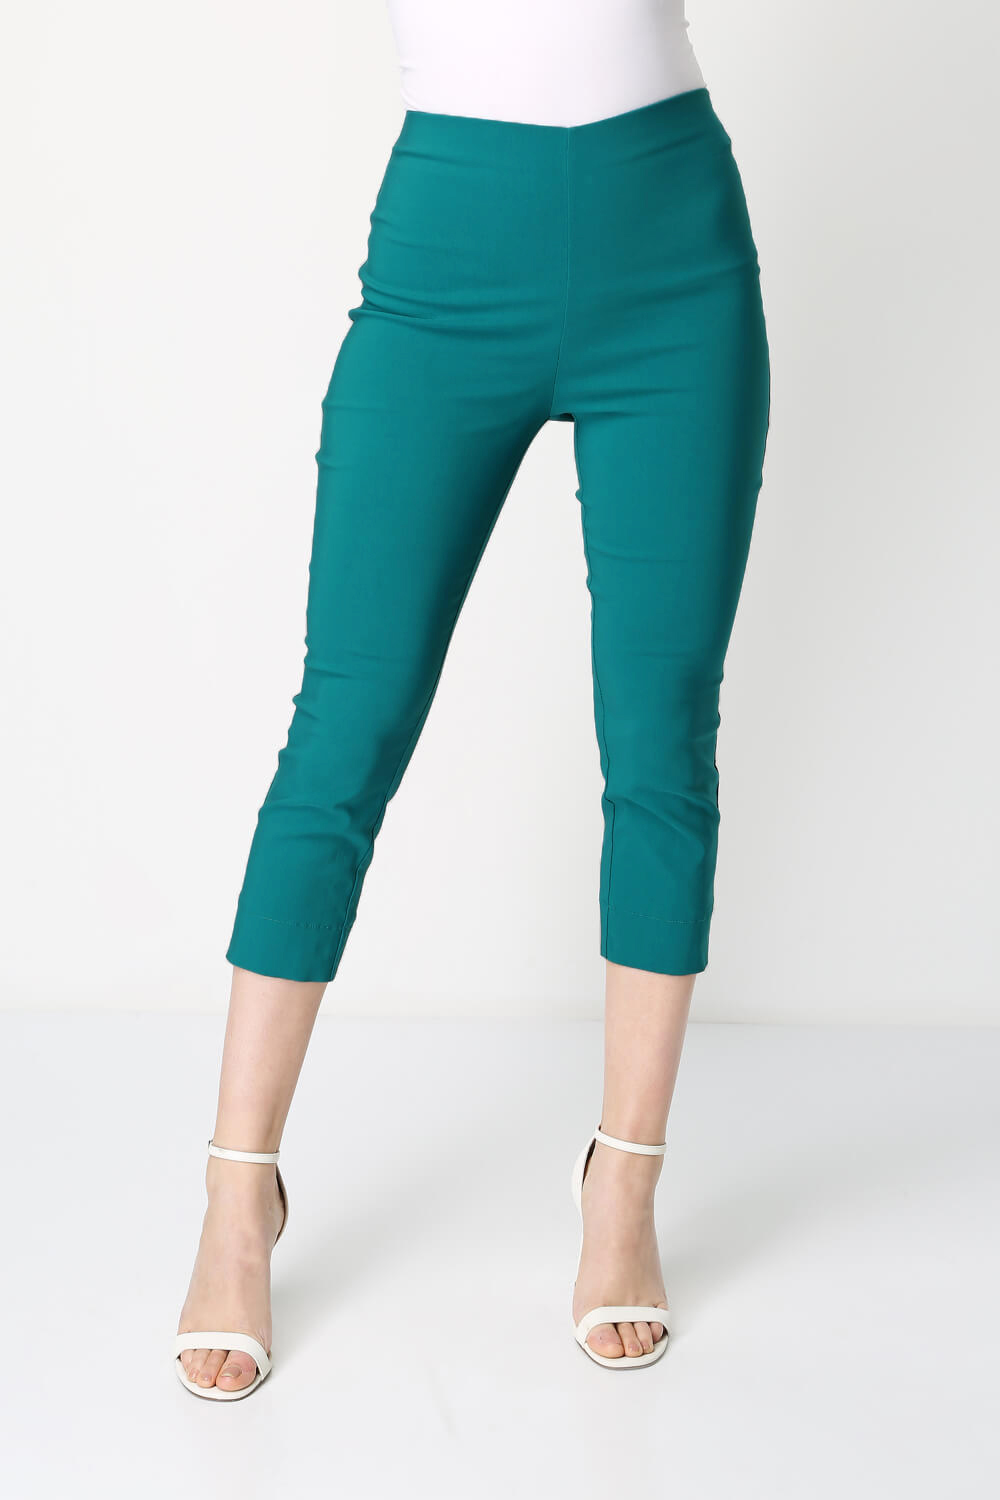 Jade Green Cropped Stretch Trouser, Image 1 of 4